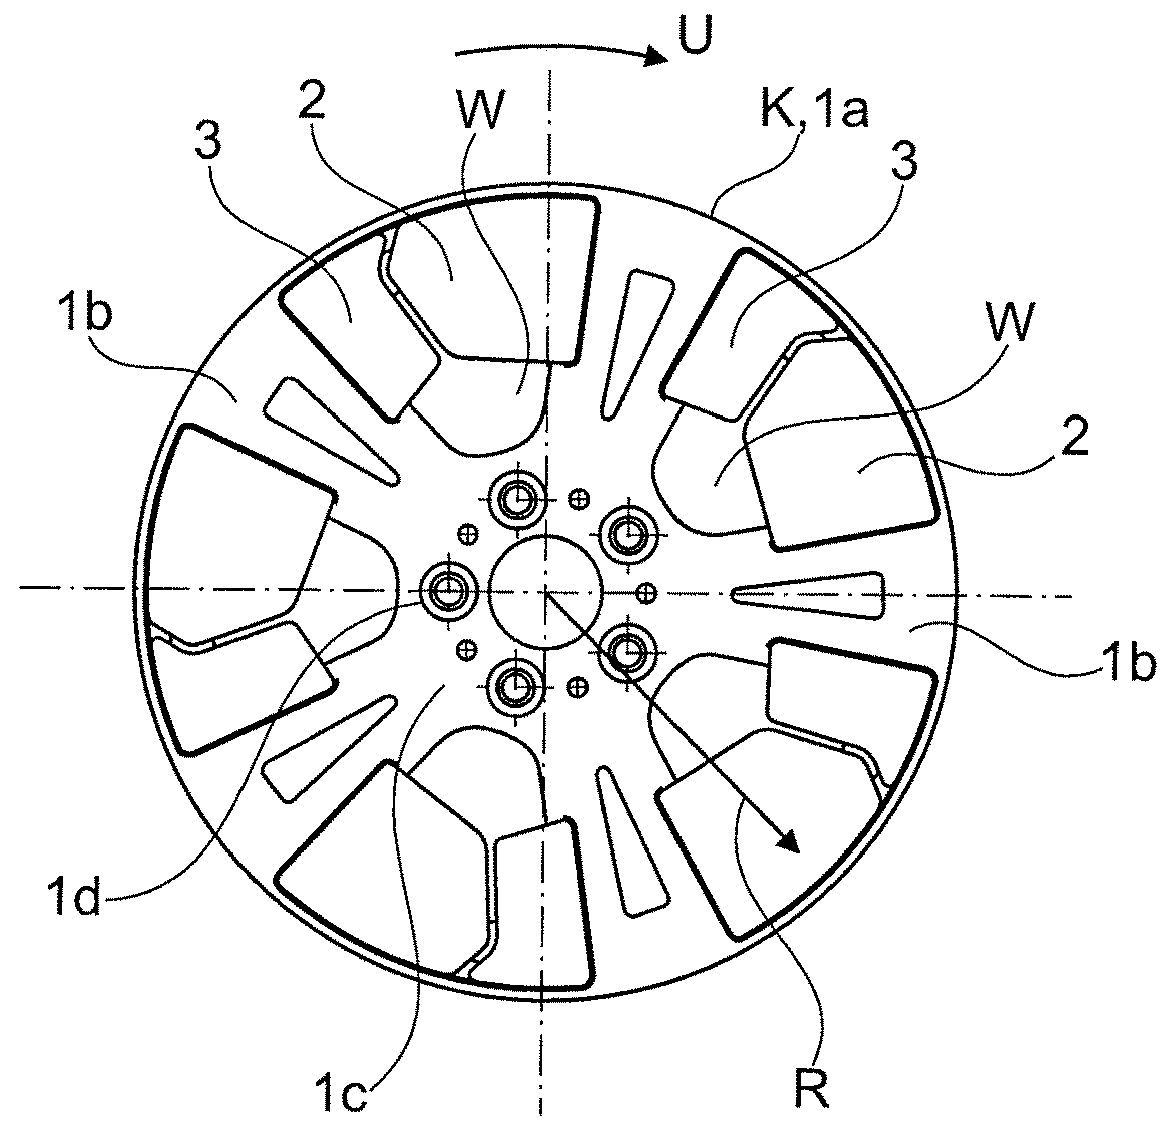 Vehicle Wheel with Cover Elements for the Spaces Between the Spokes